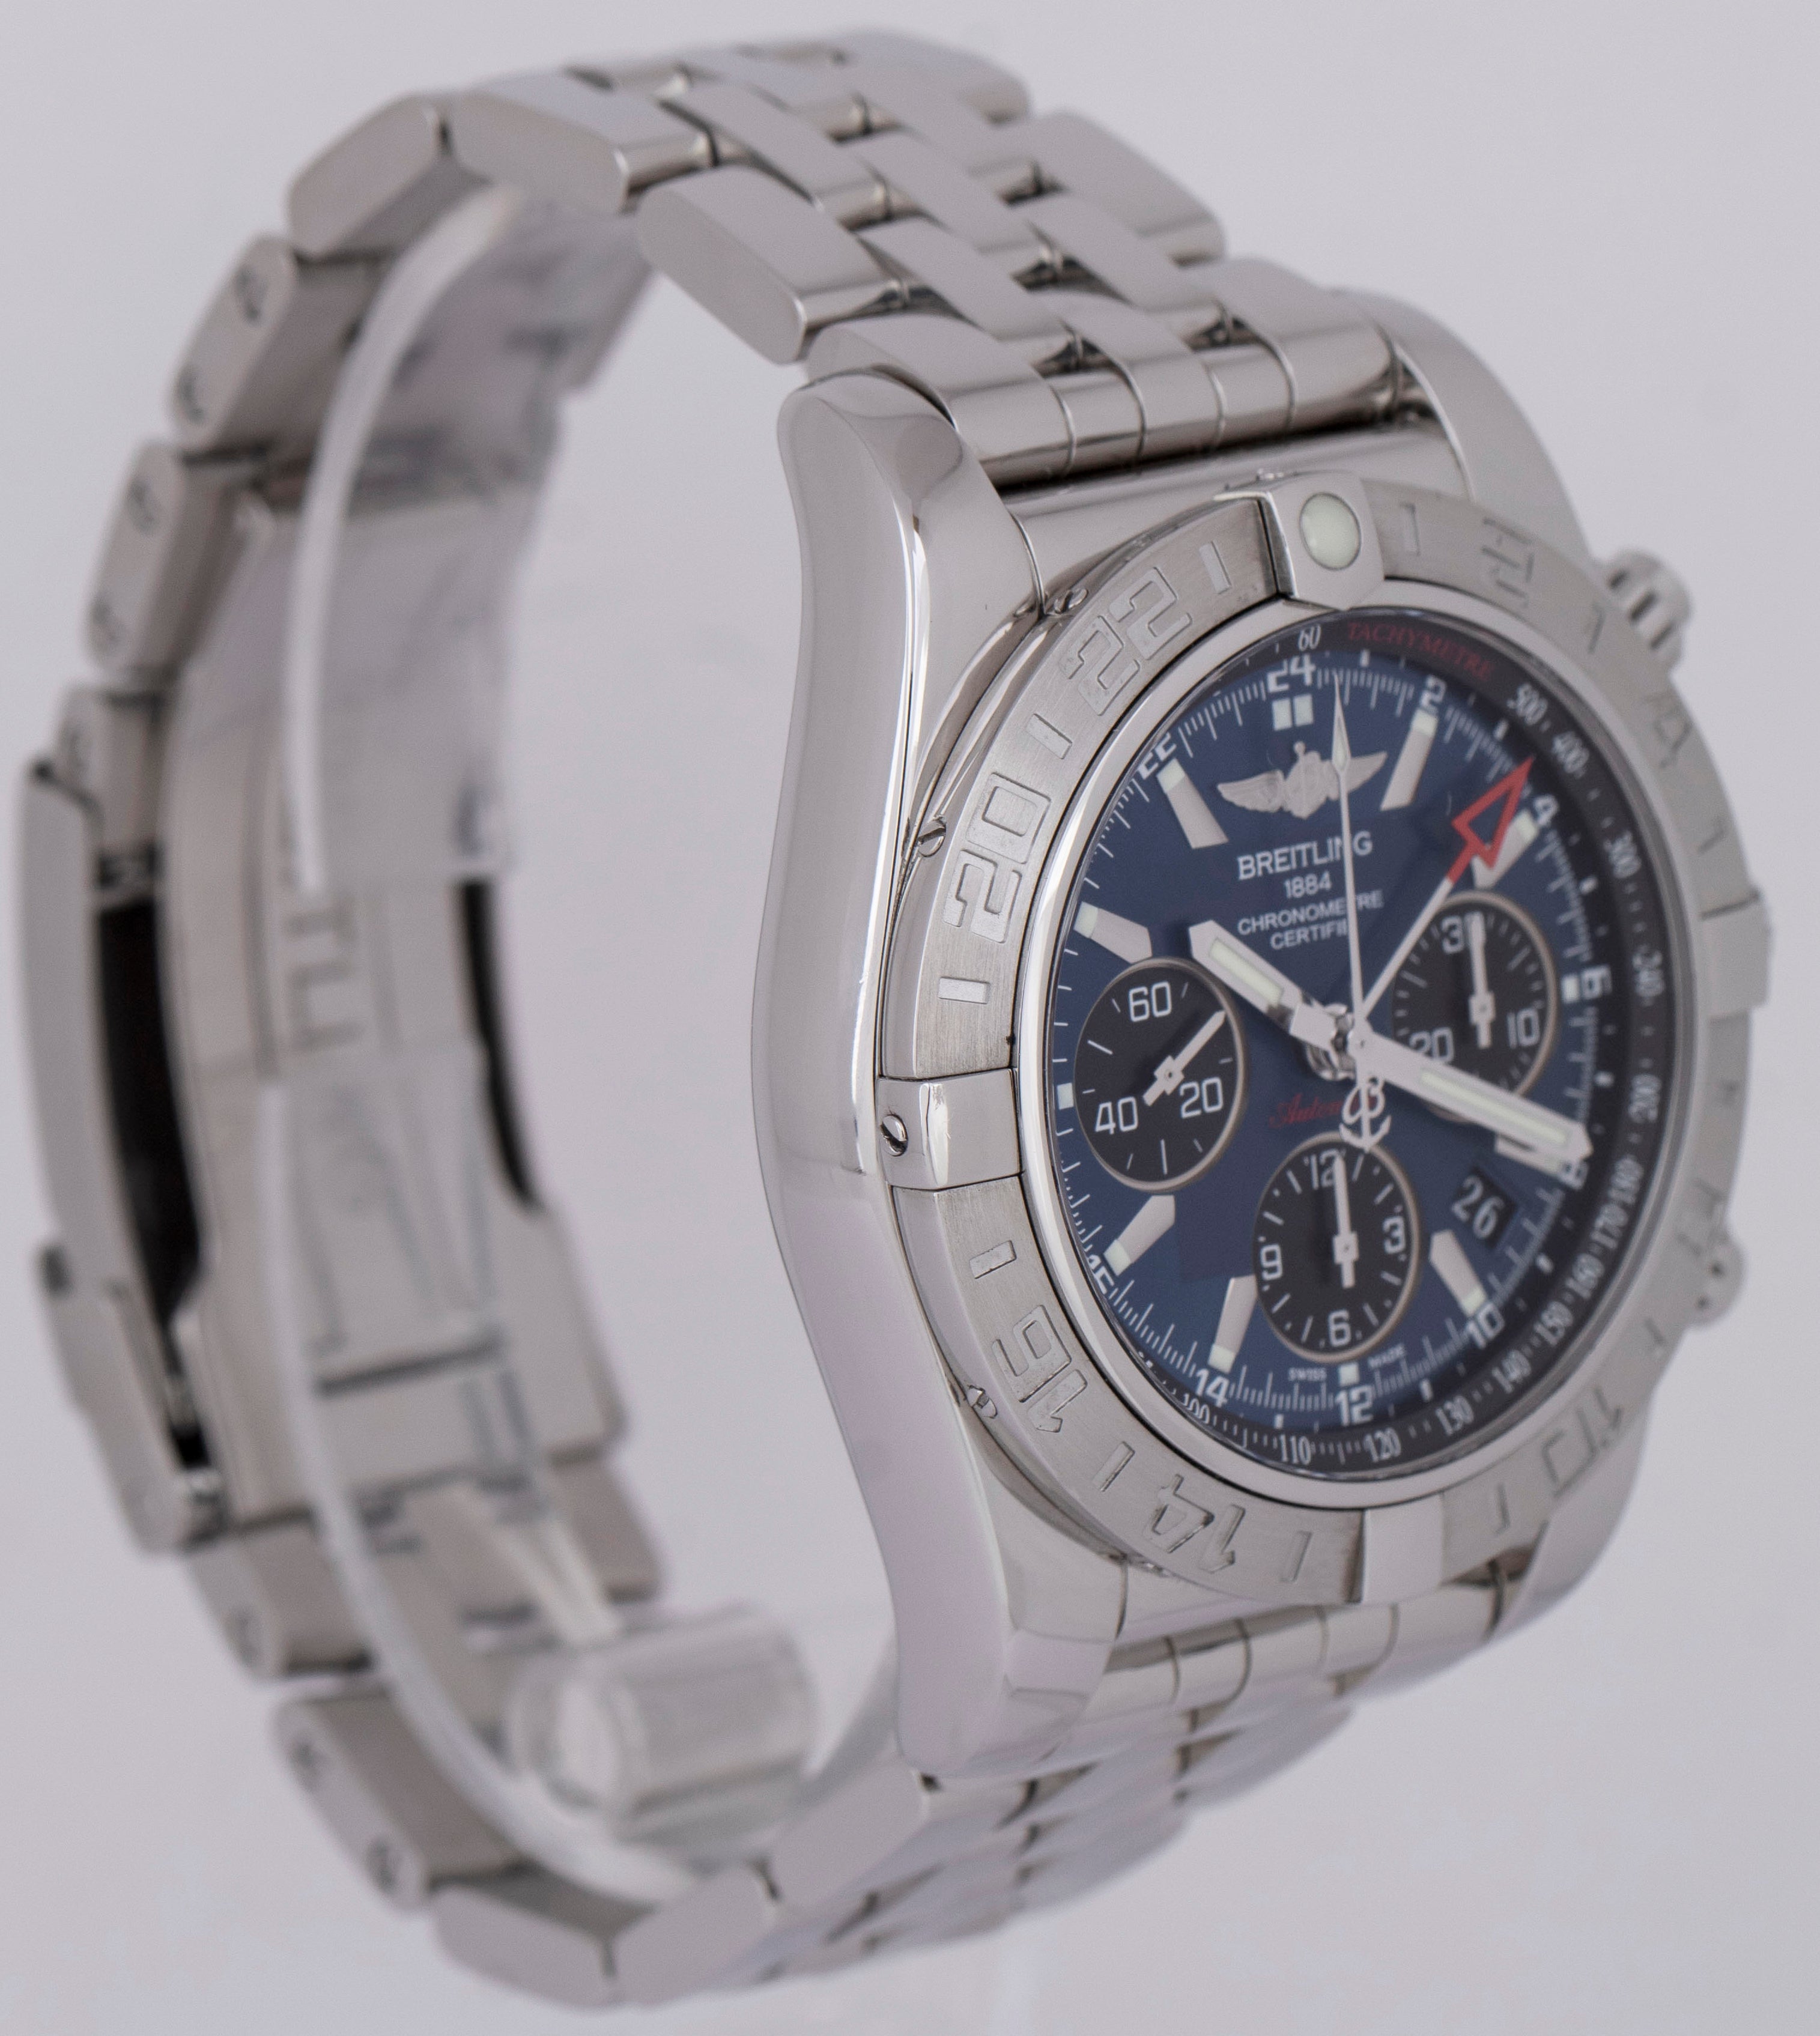 MINT PAPERS Breitling Chronomat GMT Blue Stainless Steel 44mm AB0420 Watch BOX